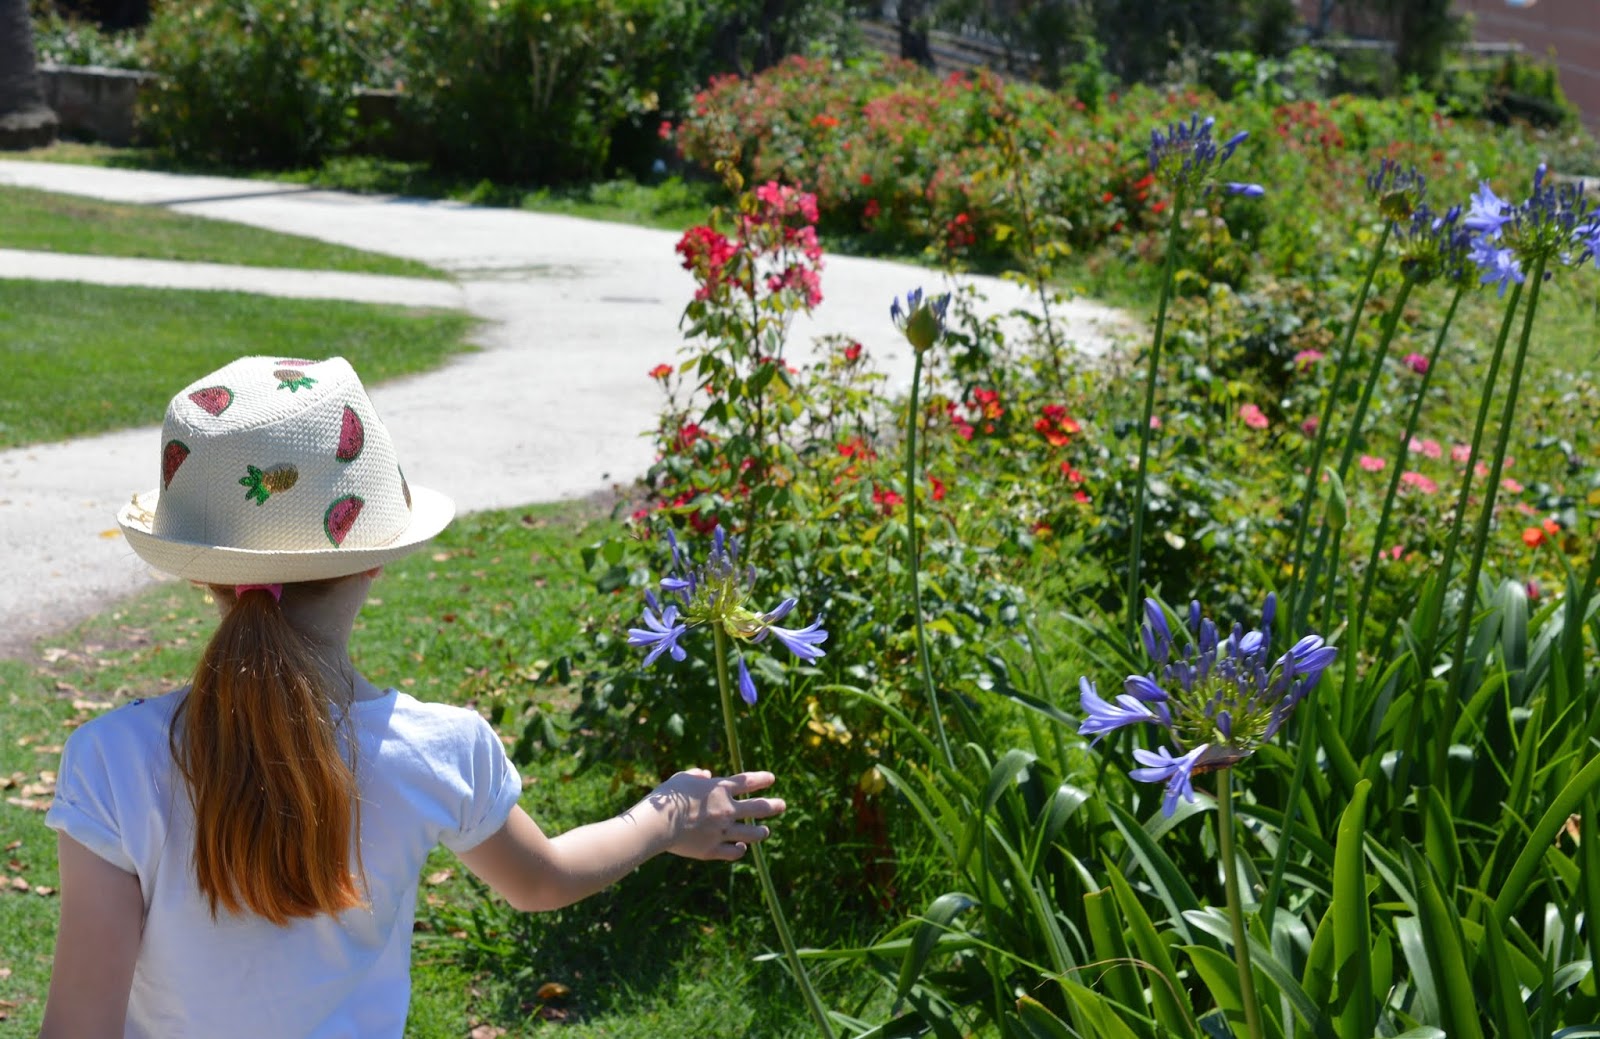 How to spend a weekend in Genoa with kids - Nervi award winning rose garden